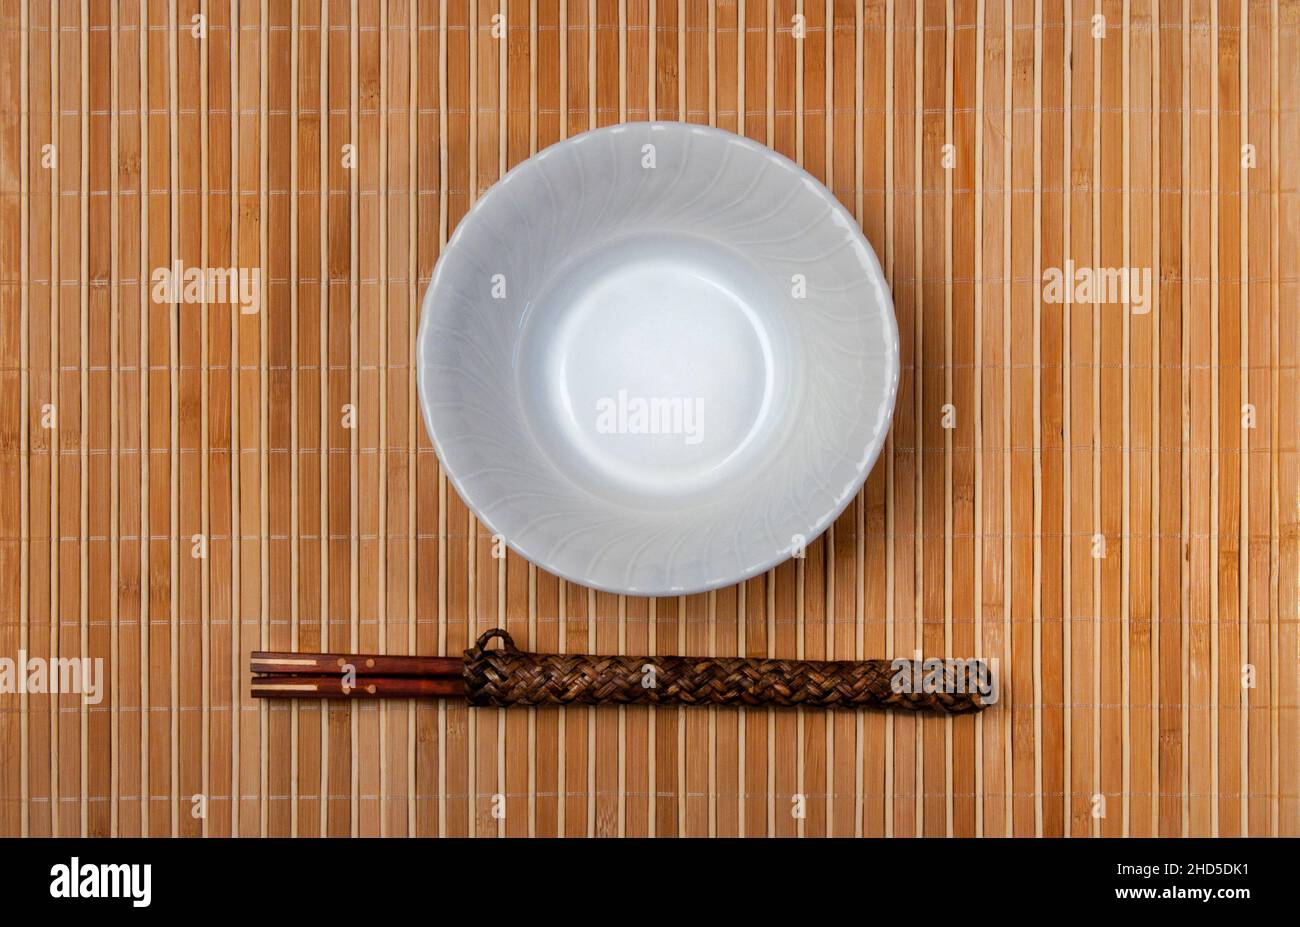 asian style bowl and chopstick on bamboo background. Stock Photo